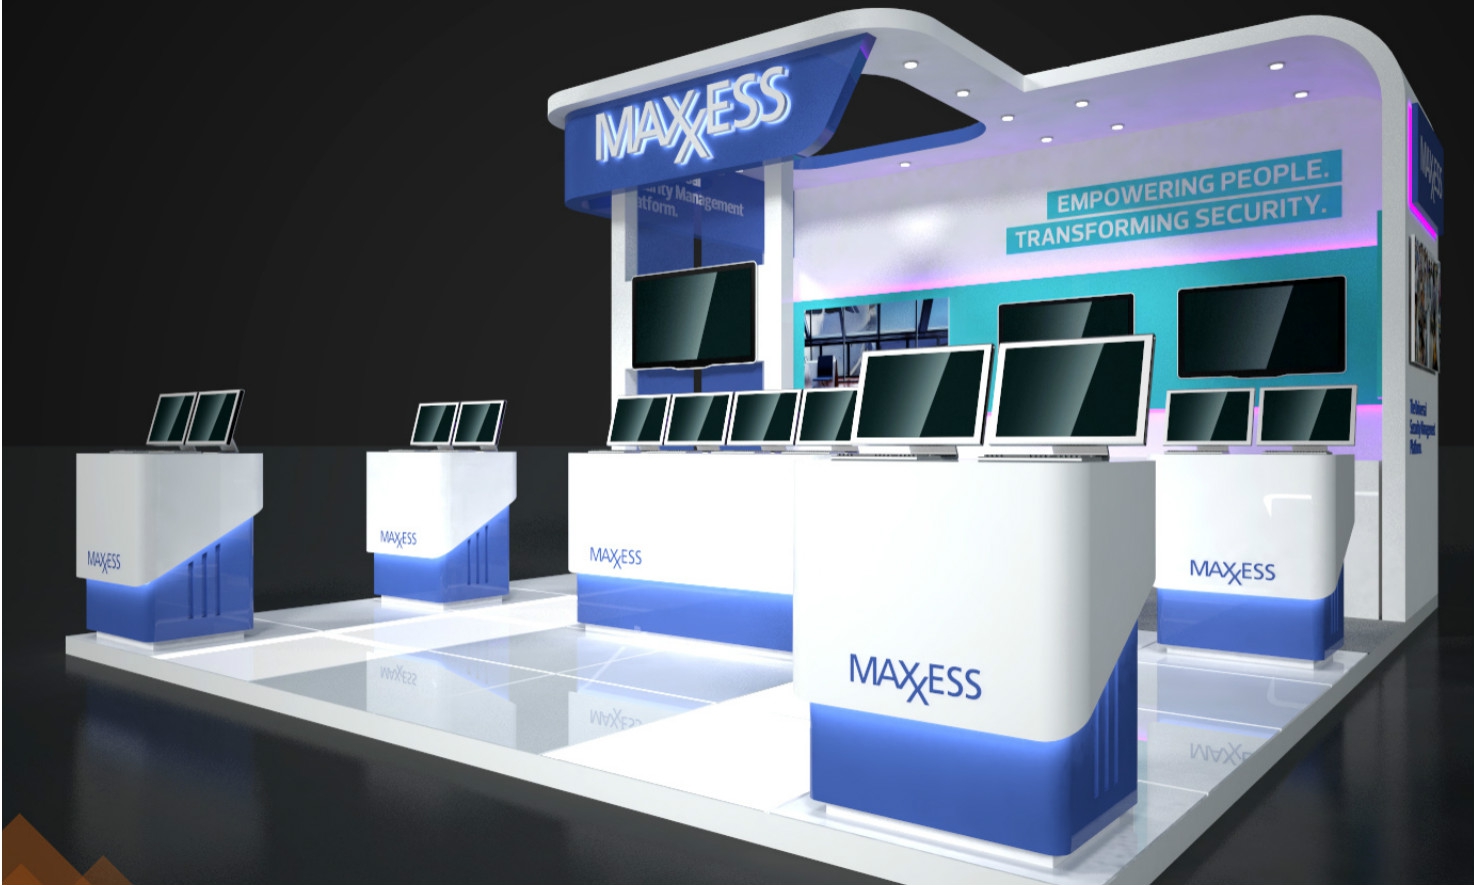 Maxxess to launch big data intelligence platform and powerful visitor management capability at Intersec 2017